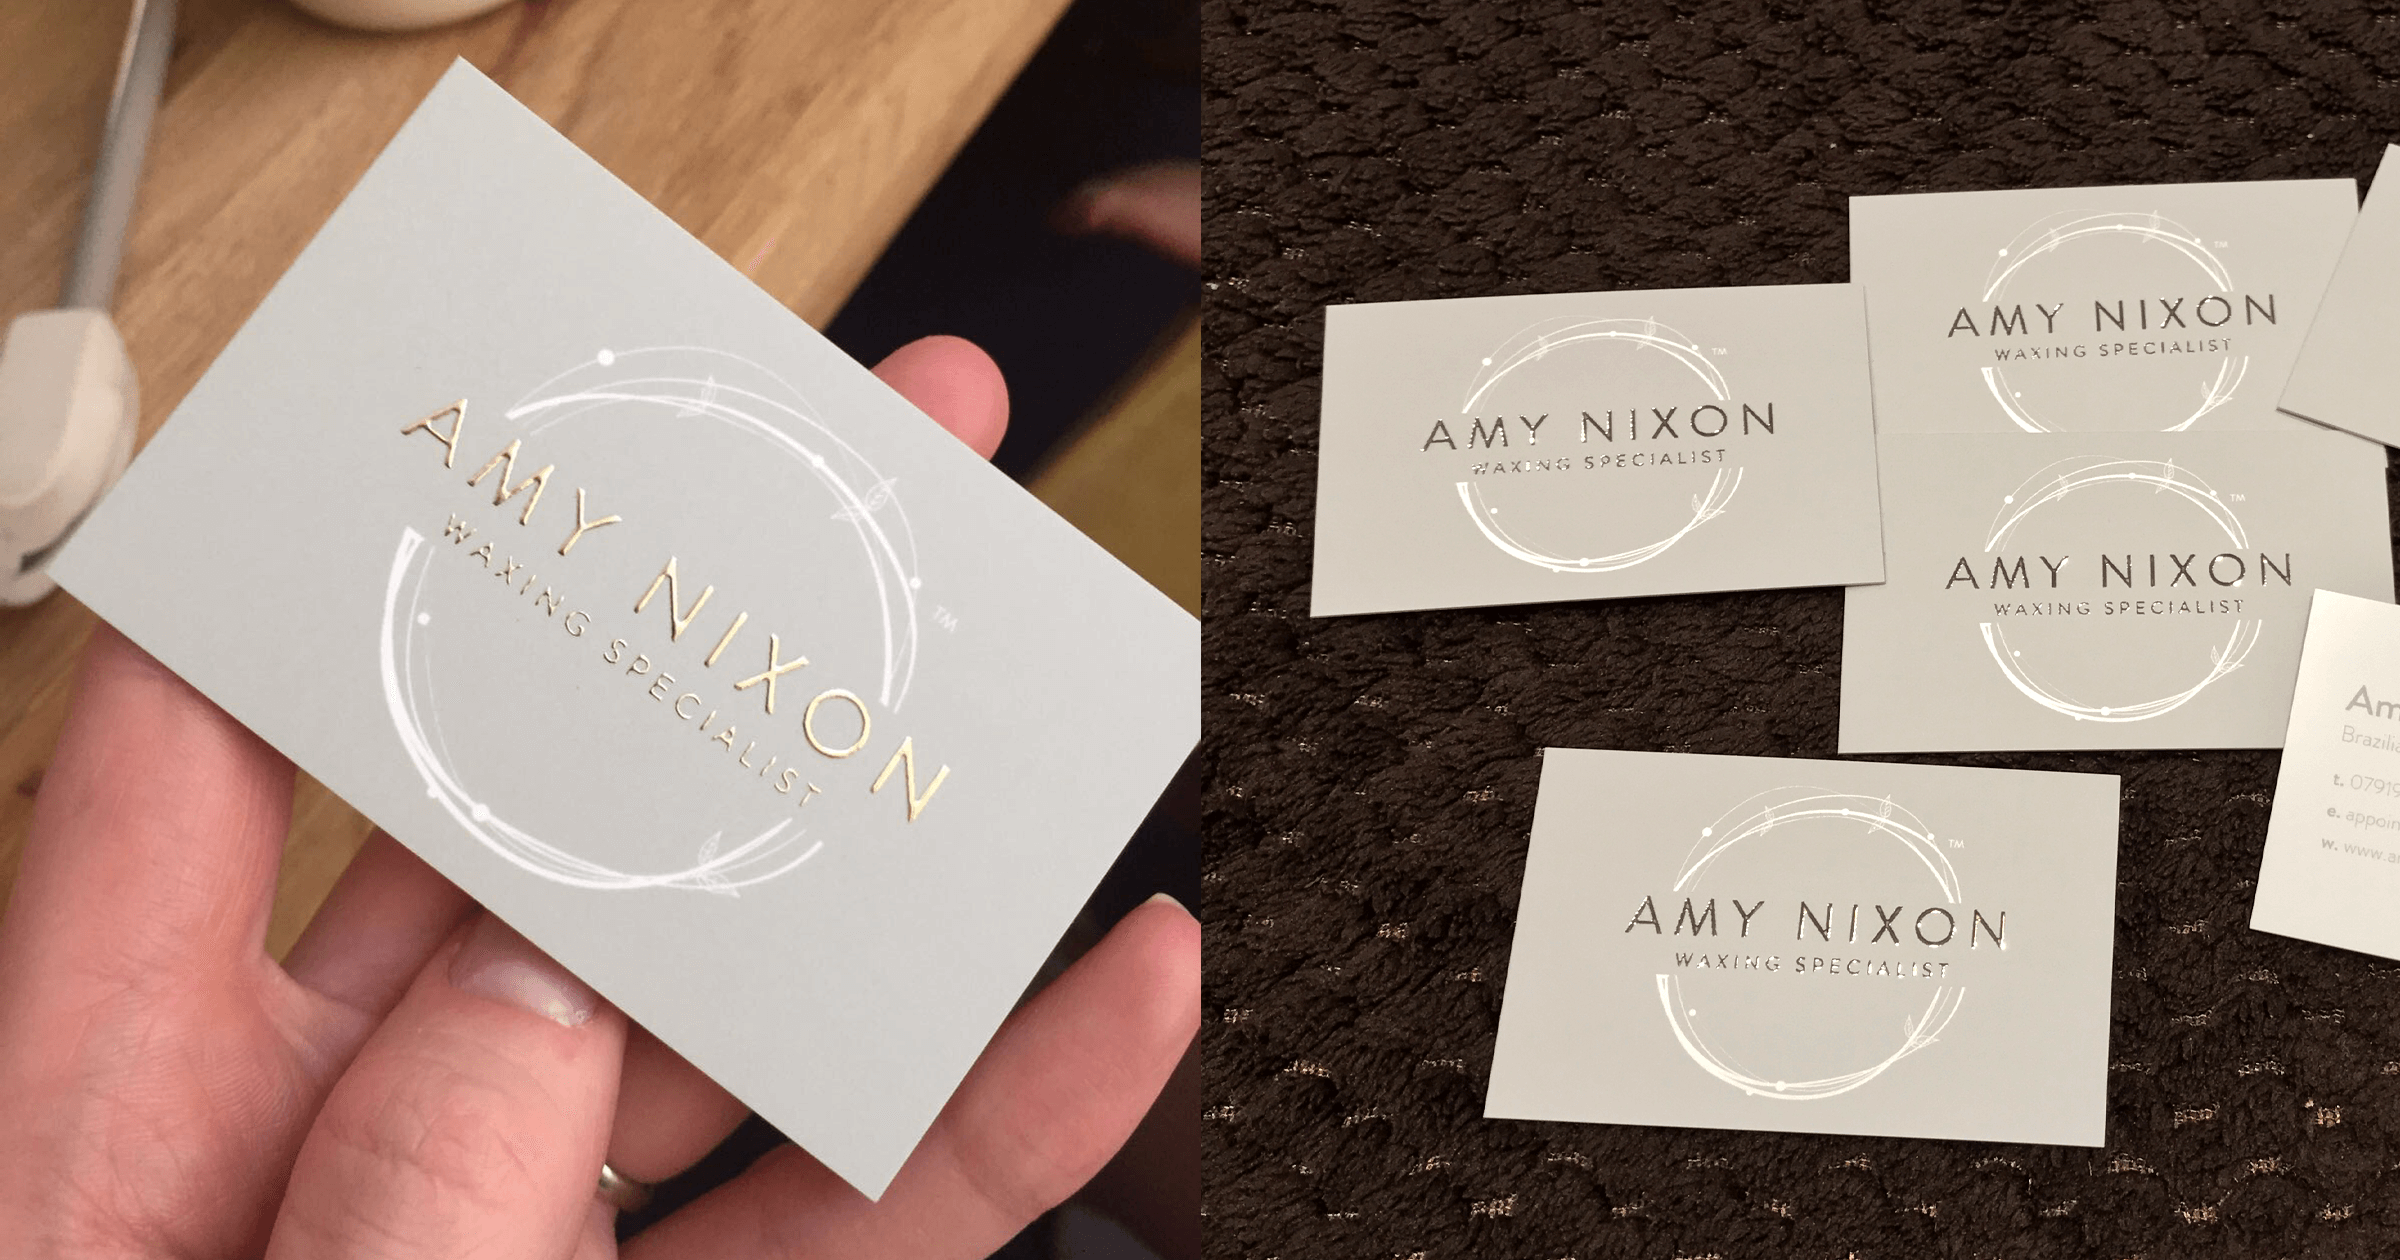 Amy Nixon business cards